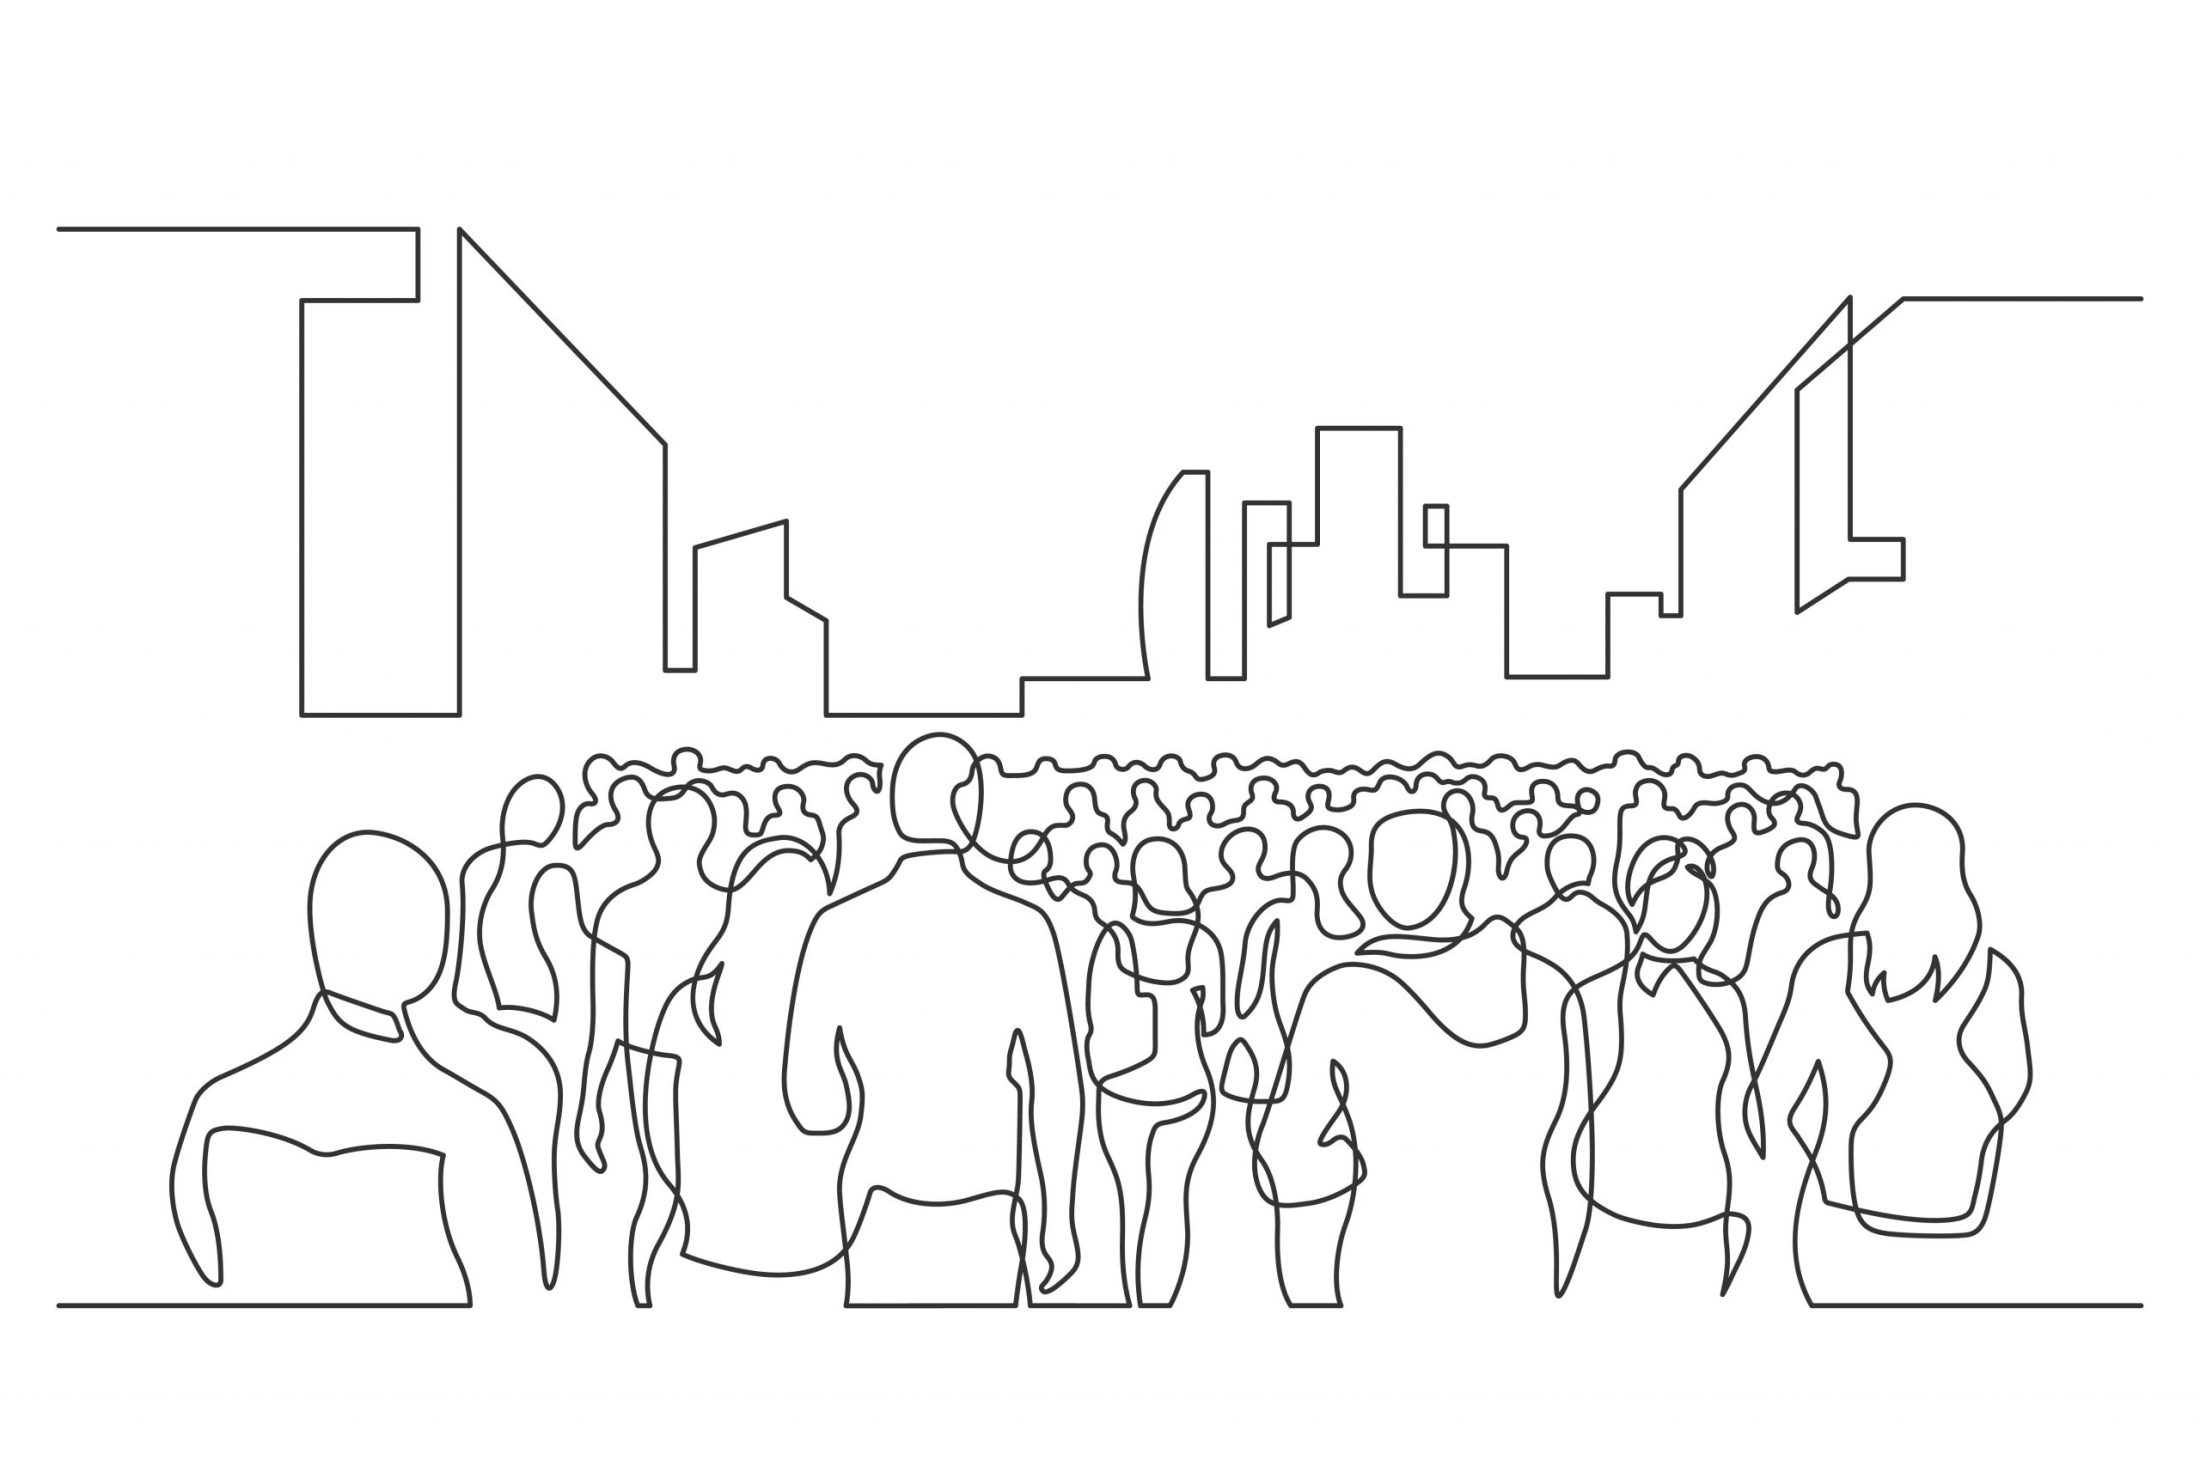 Continuous line drawing of people crowd walking on city street. Vector illustration